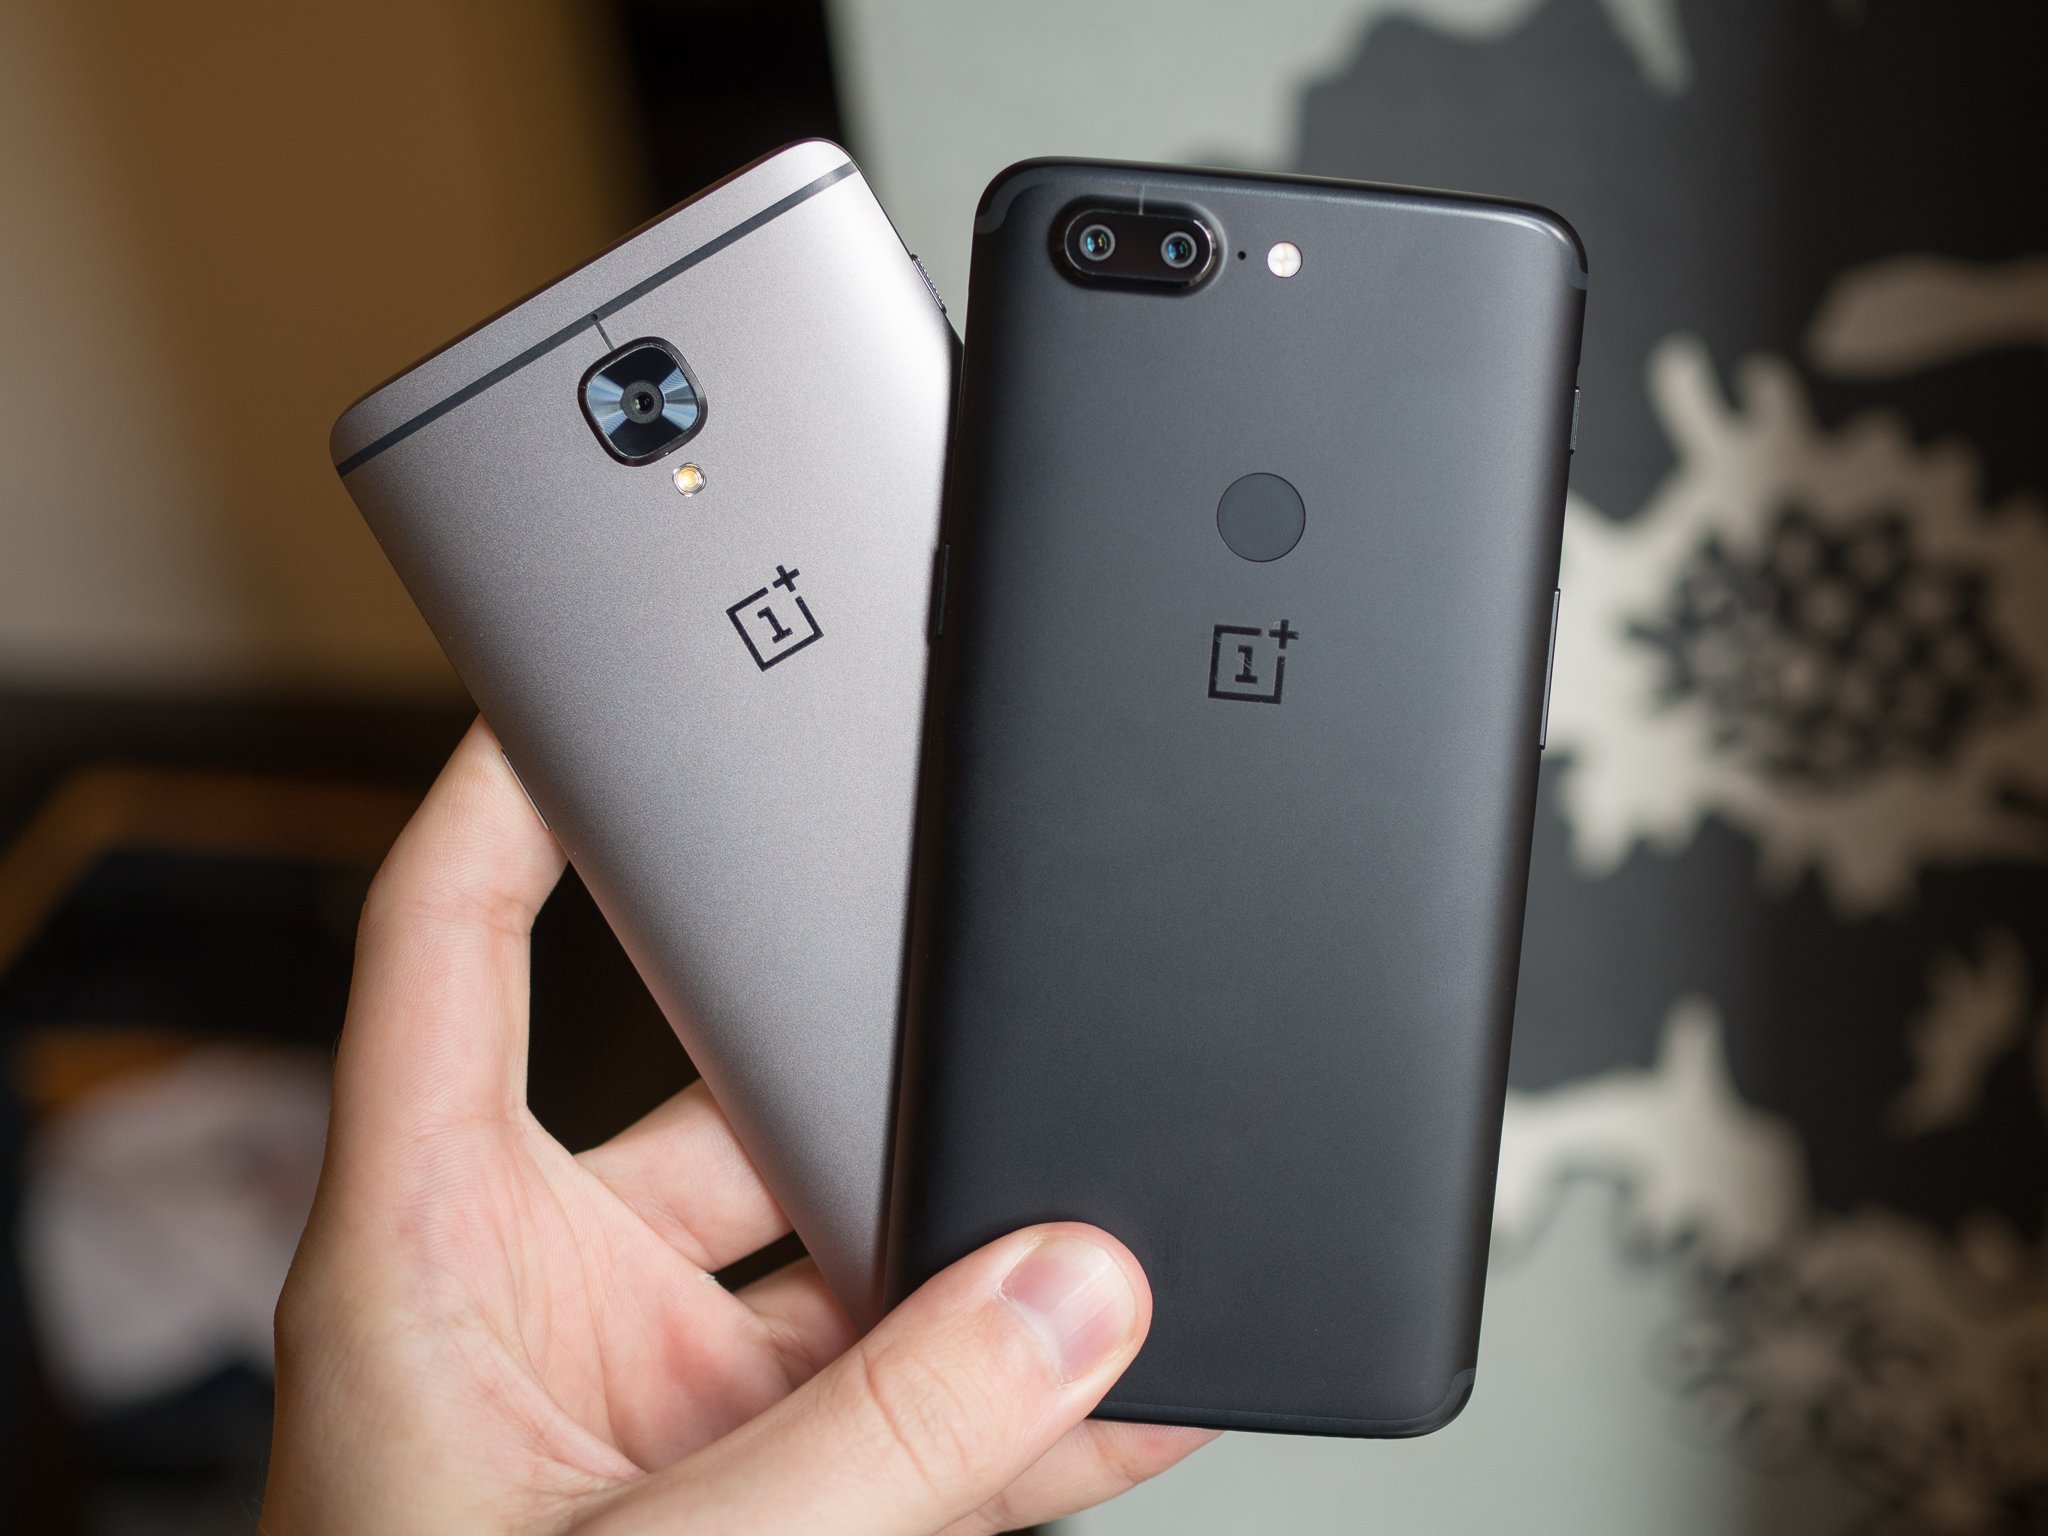 Compare oneplus 3 and oneplus 5t